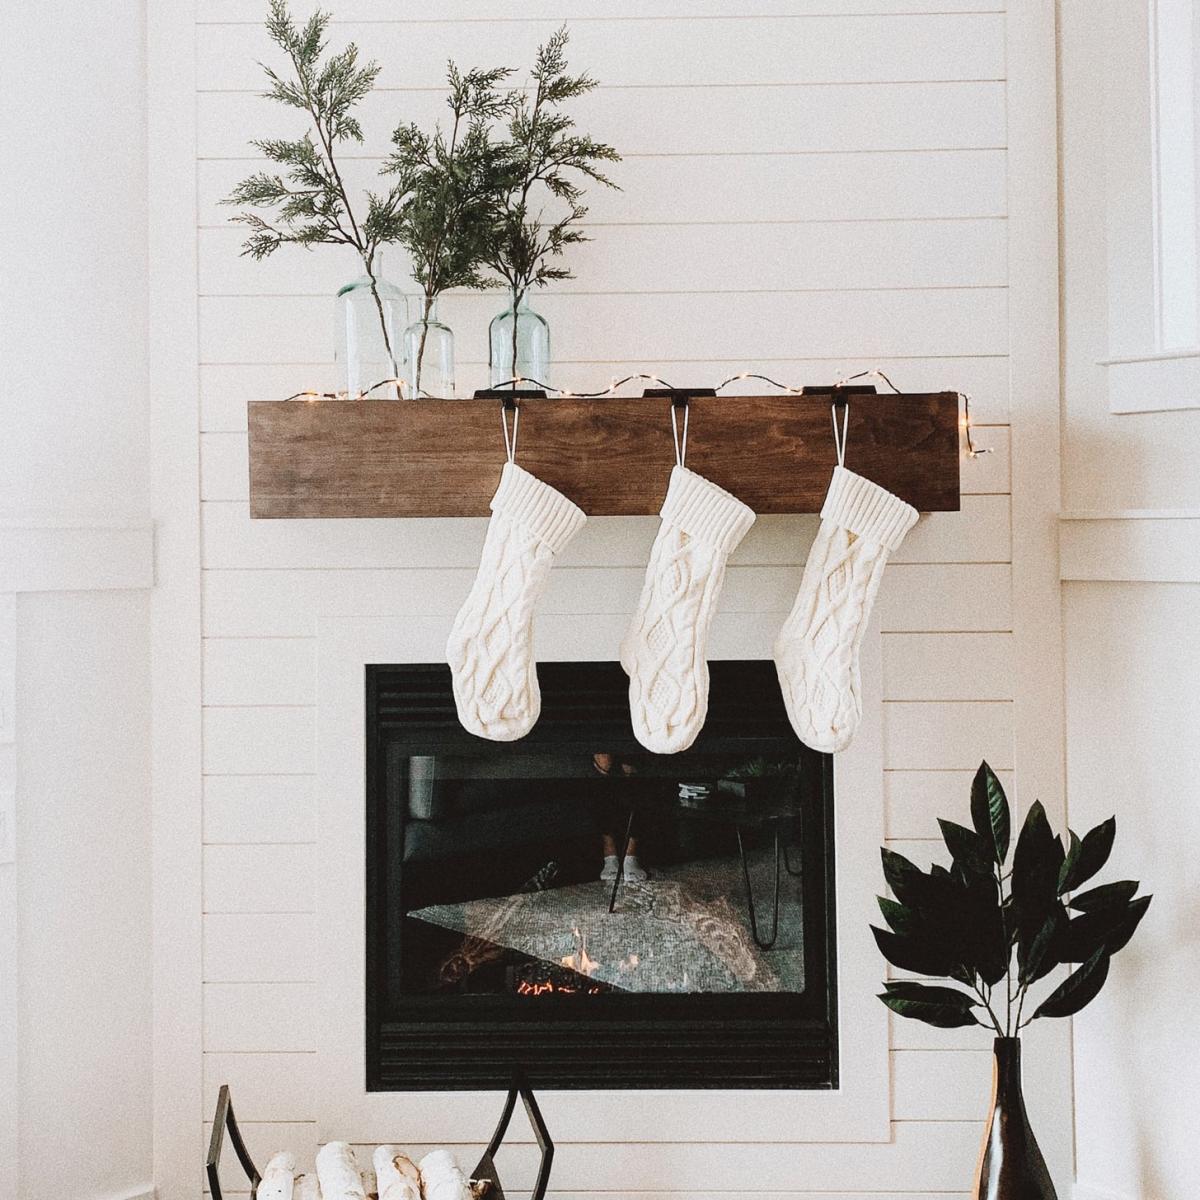 Stockings hung above a fireplace. - White Christmas